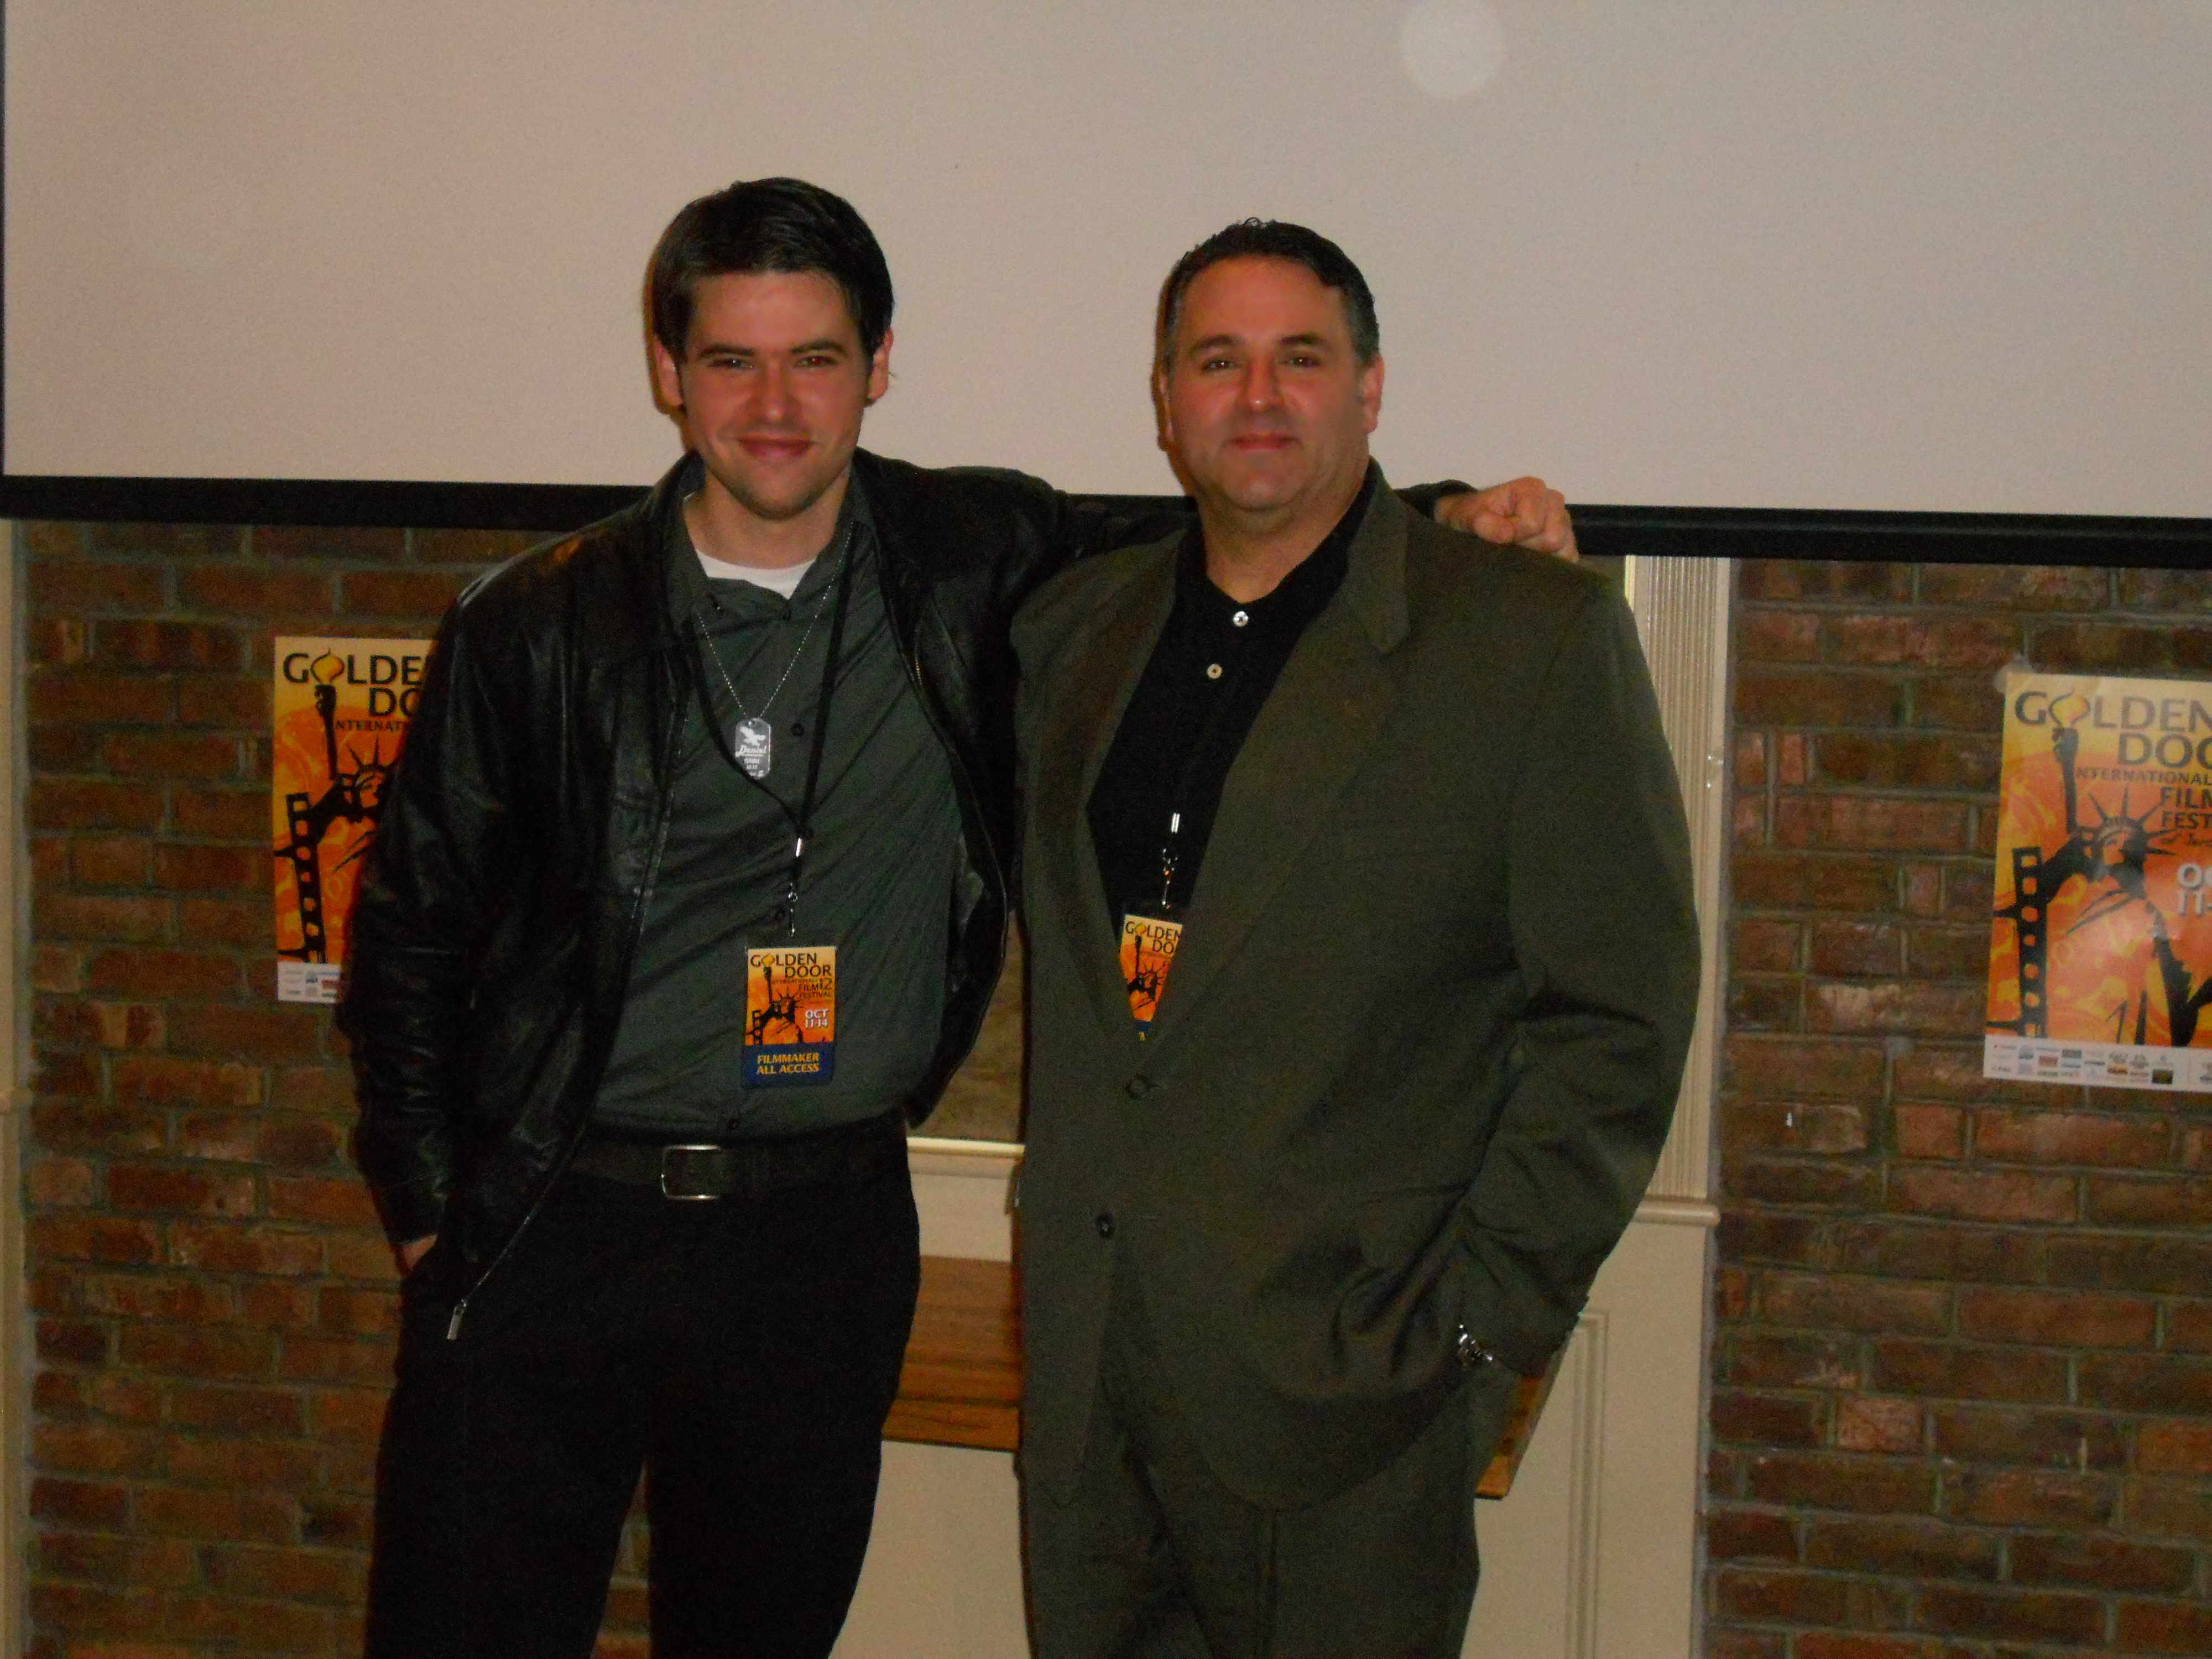 Award-Winning Writer-Director/Producer Sam Borowski (R) poses with Award-Winning Filmmaker Daniel McQueary at the screening venue before the final festival screening of McQueary's film, ALFRED THINKS WE'RE ALIENS at the 2012 GOLDEN DOOR INTERNATIONAL FILM FESTIVAL OF JERSEY CITY.